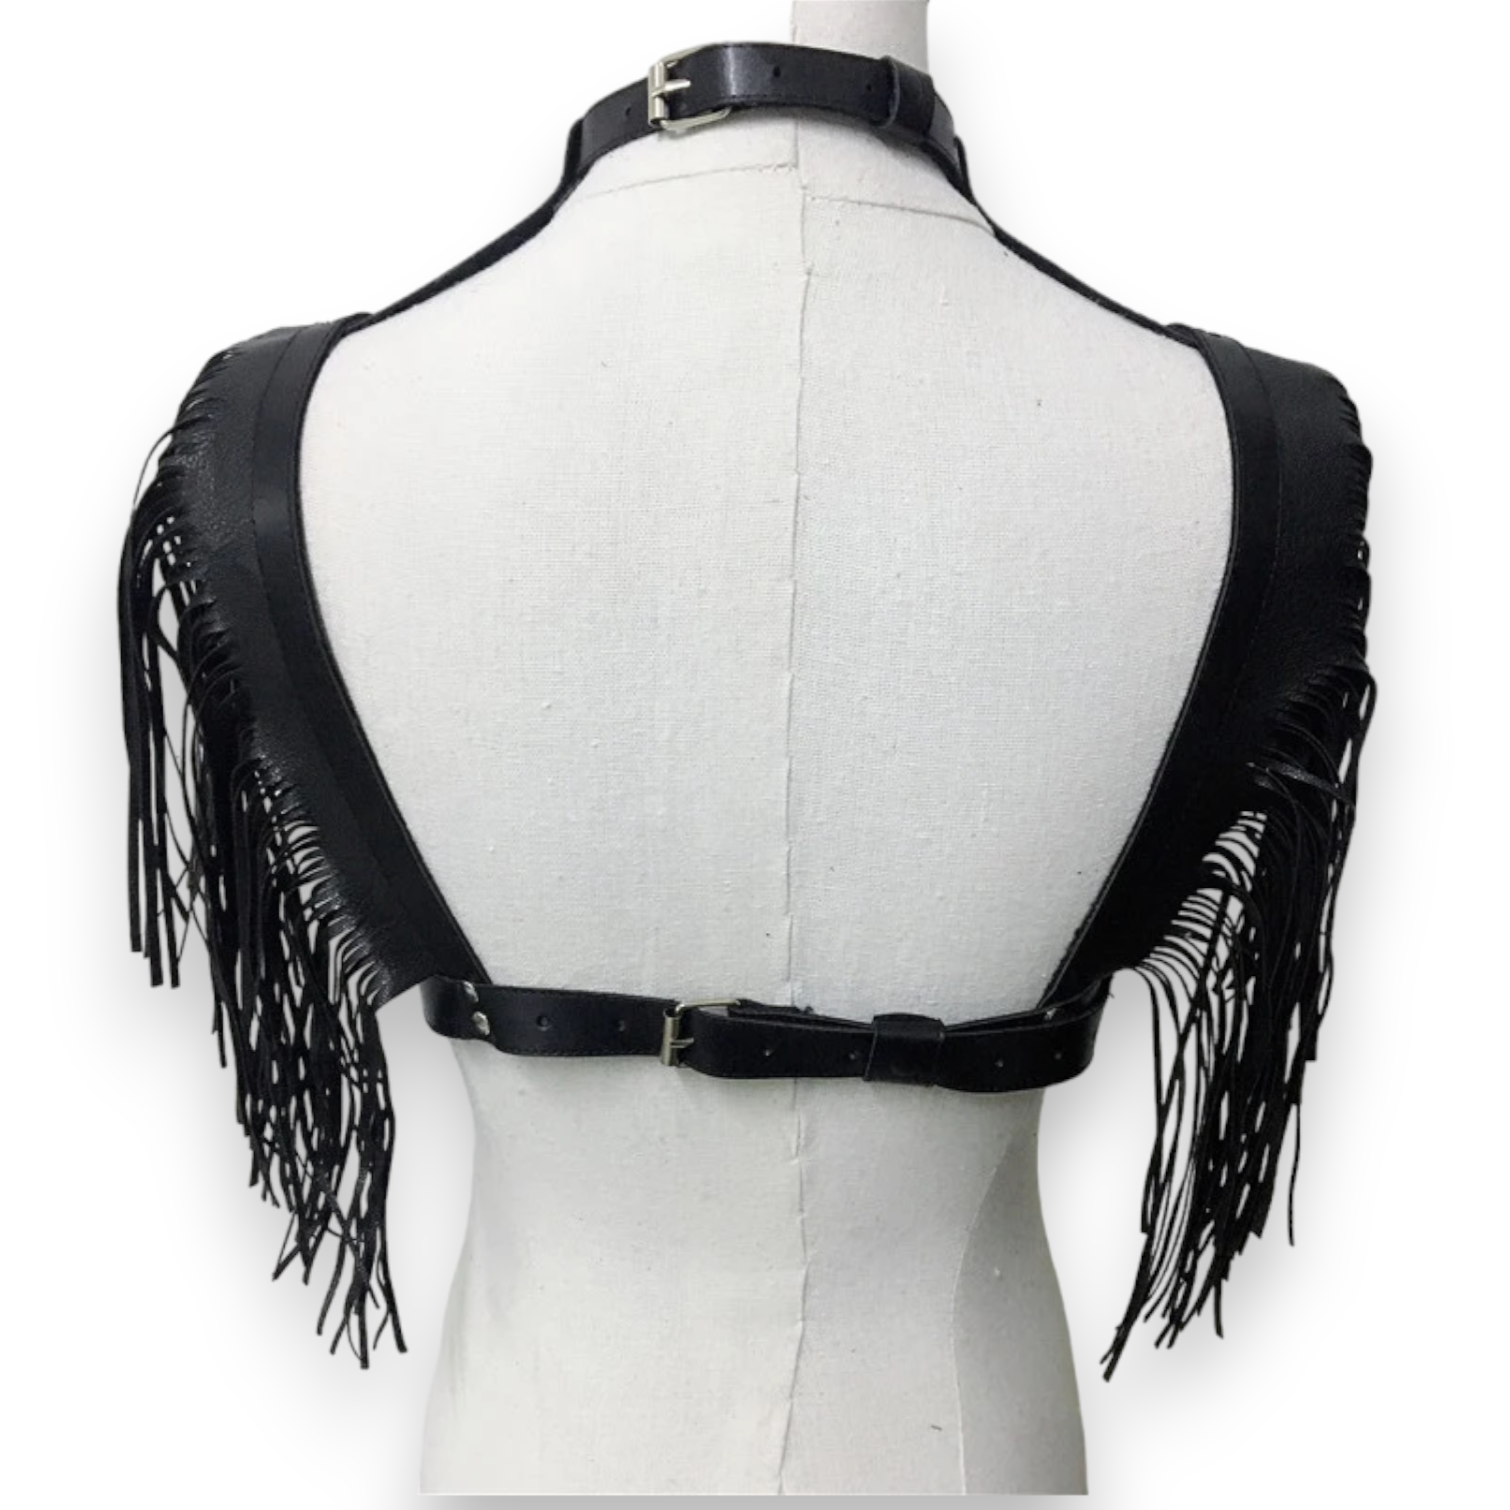 Leather Harness Black with fringes - Rave apparel, festival outfit, Rave outfit.